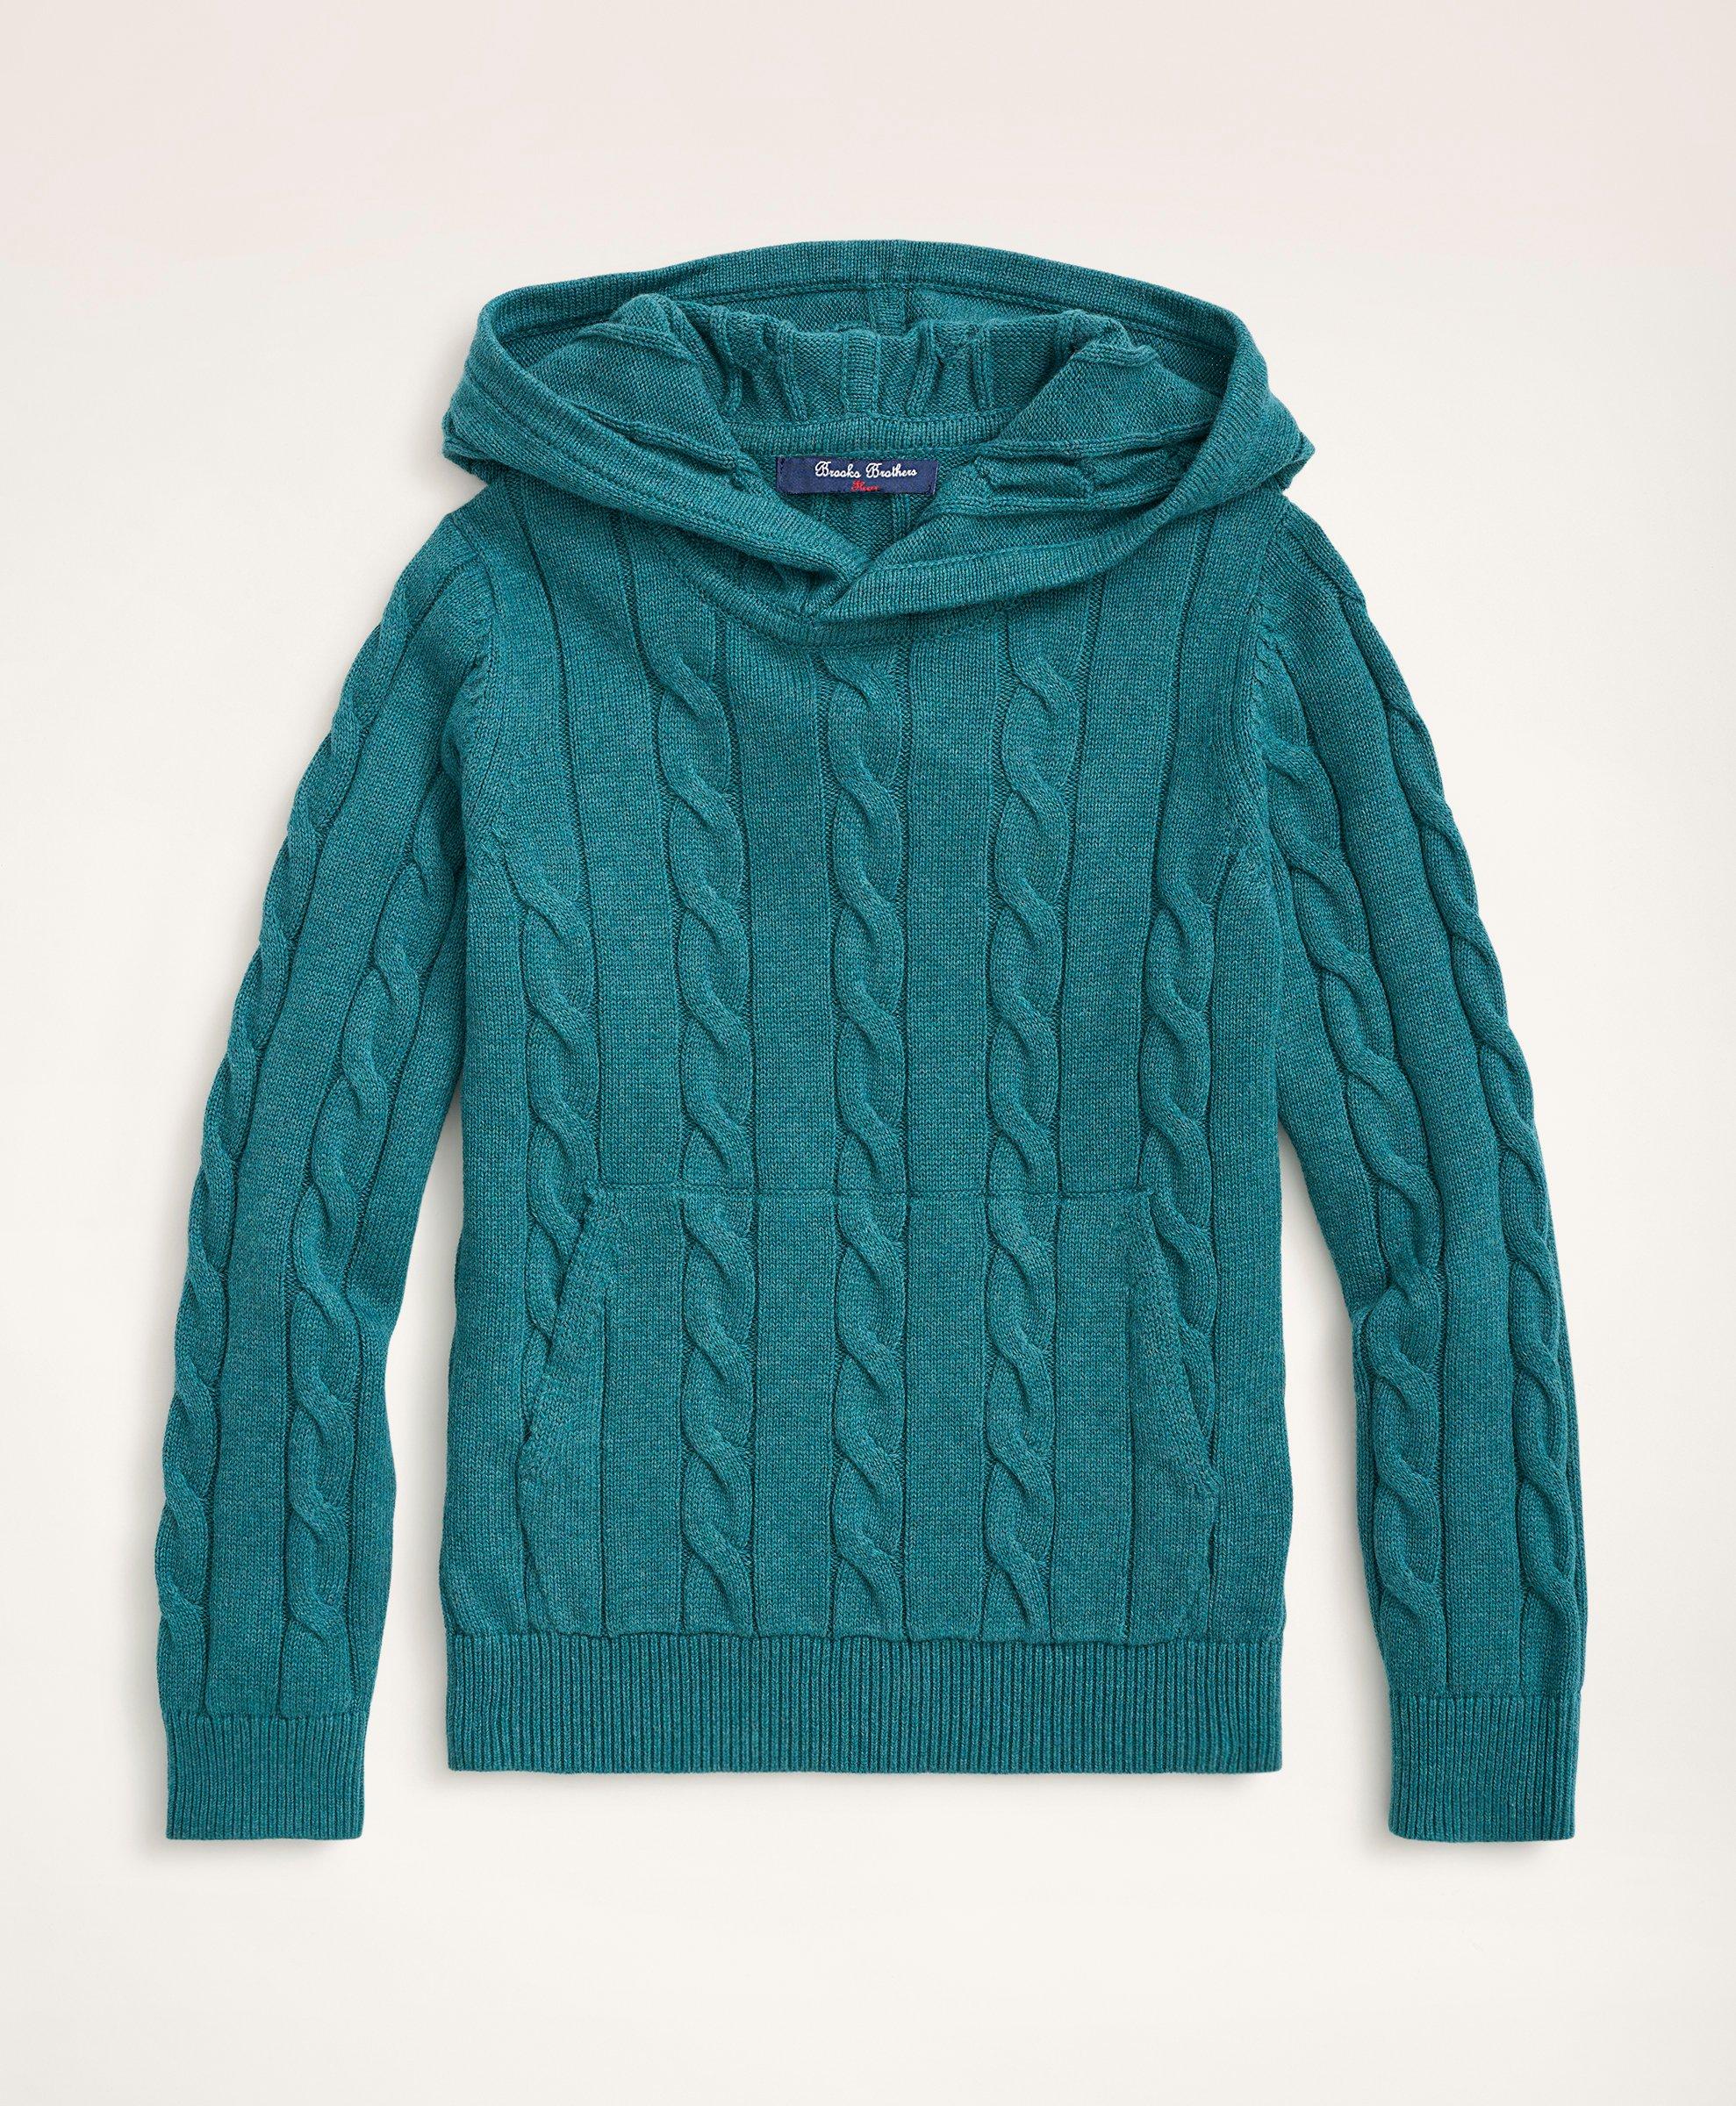 Brooks Brothers Kids'  Boys Cotton Cable-knit Hoodie Sweater | Teal Heather | Size Large